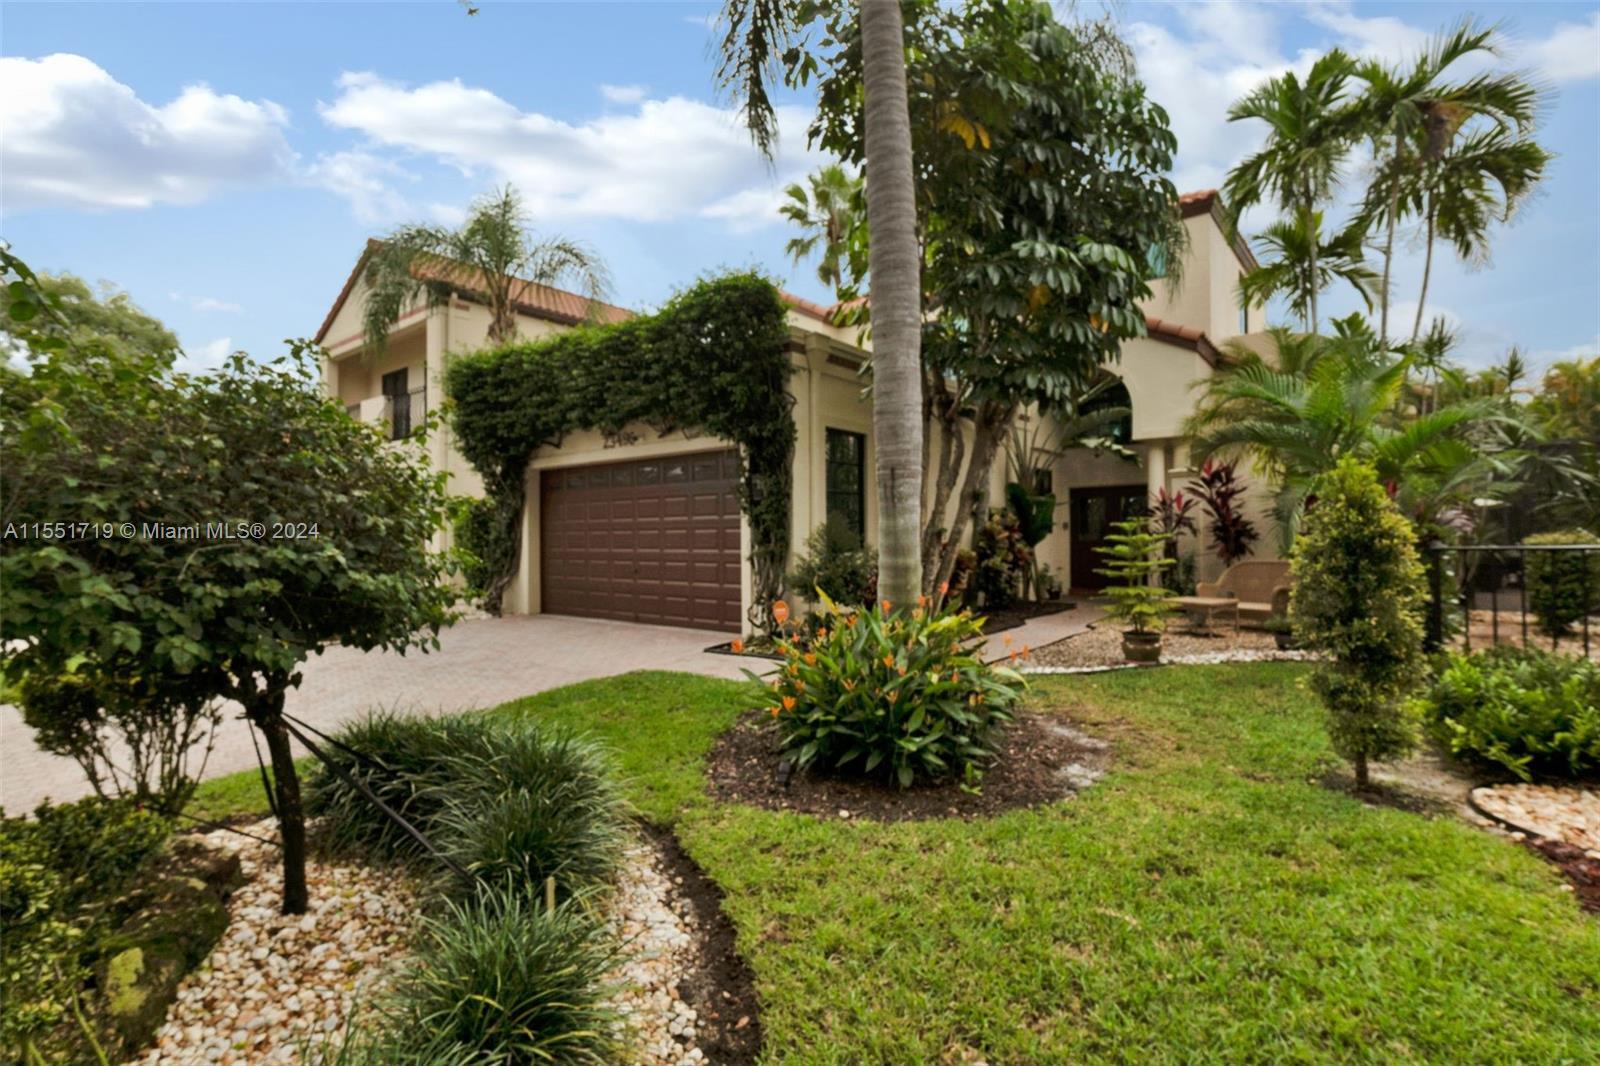 MAGAZINE-WORTHY AND STUNNINGLY RENOVATED TWO-STORY HOME IN PRESTIGIOUS VALENCIA, BOCA POINT GATED CO